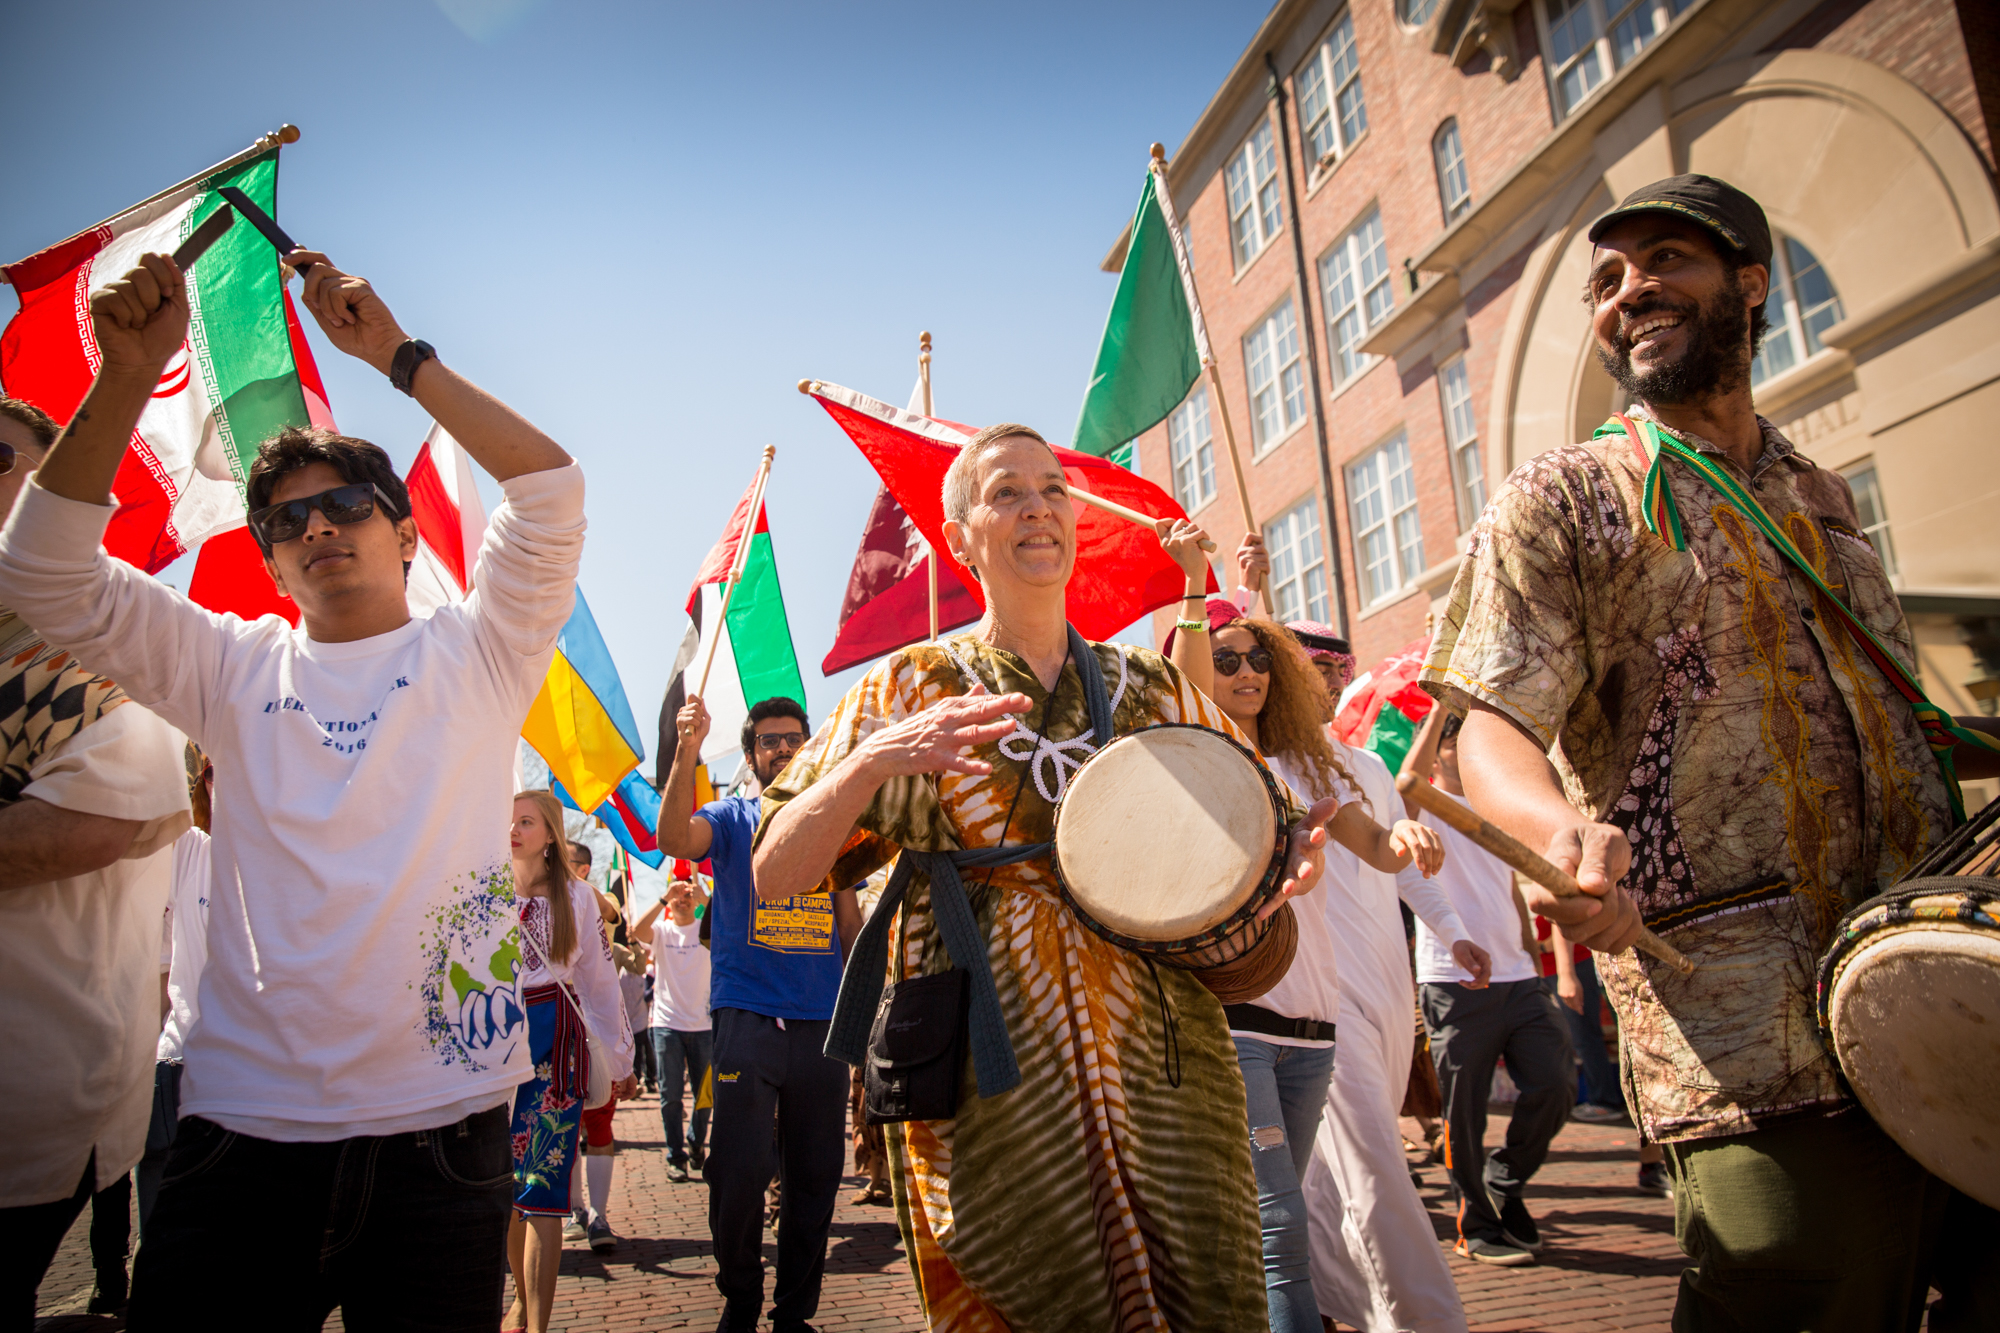 A diverse group of parade attendees with international flags makes their way down Court Street during International Street Fair